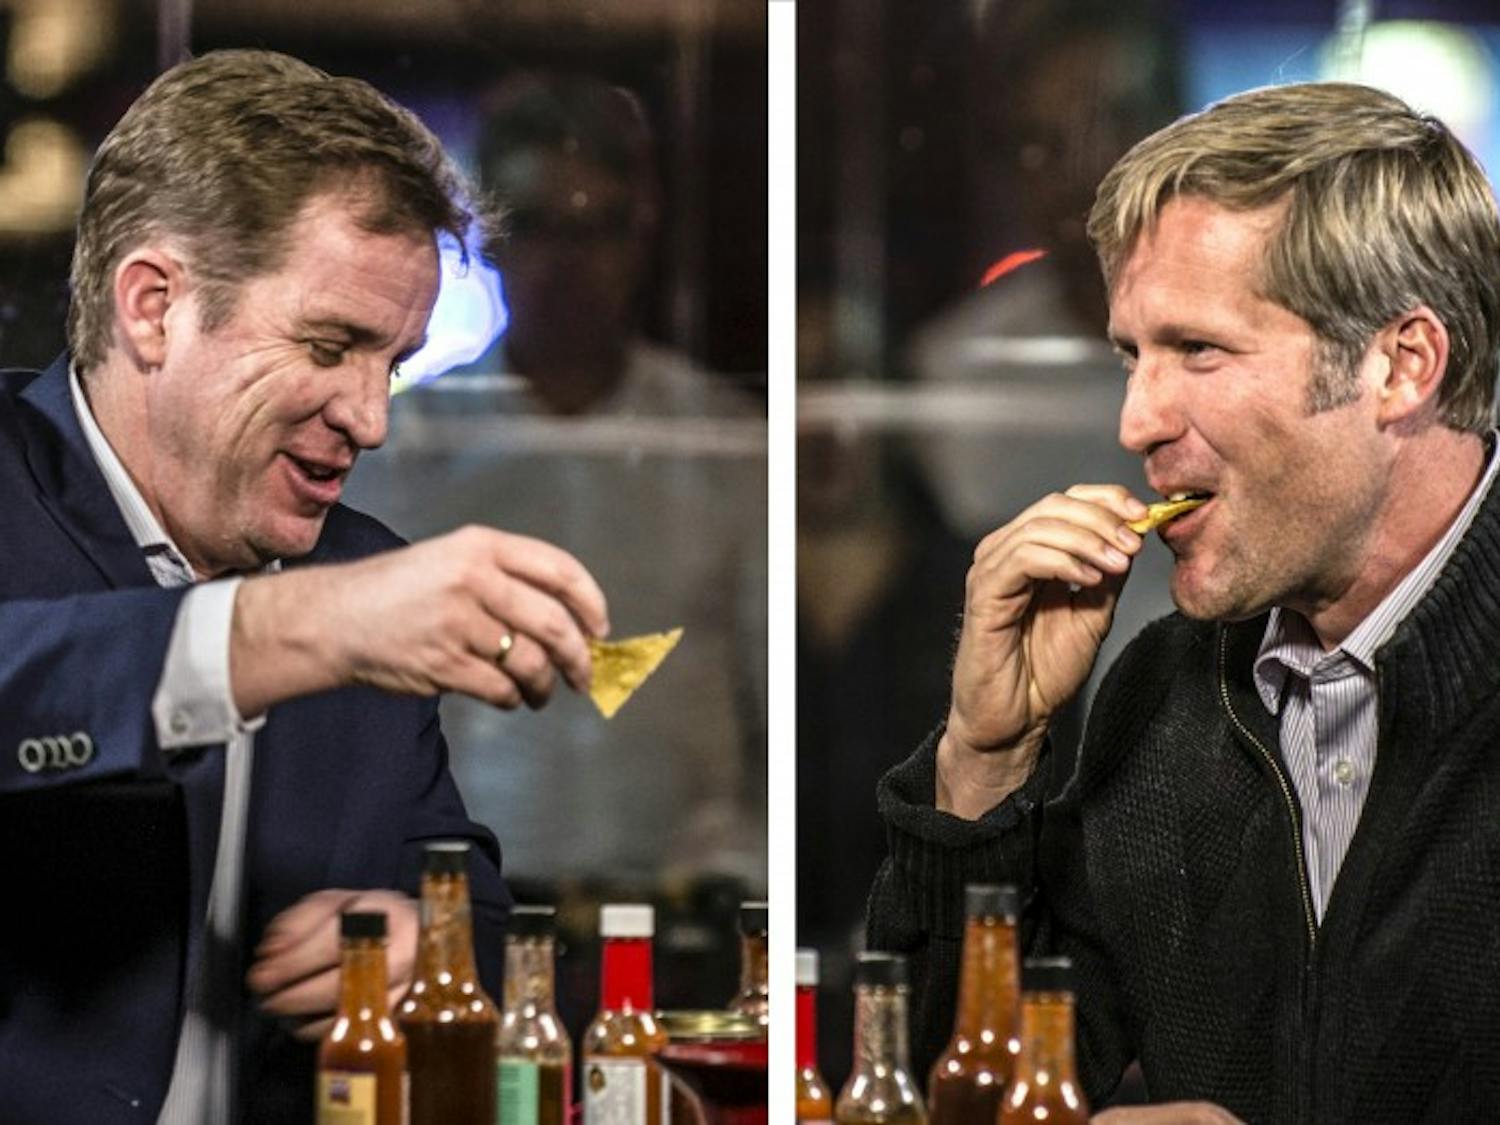 City Councilor Dan Lewis, left, and State Auditor Timothy Keller, right, participate in the Dukes Up Hot Seat interview series for the Albuquerque mayoral run-off election candidates on Oct. 25, 2017. Each interview consisted of the candidates eating nine different salsas/hot sauces, each hotter than the last, while also answering questions about their bid to become the city’s next mayor.